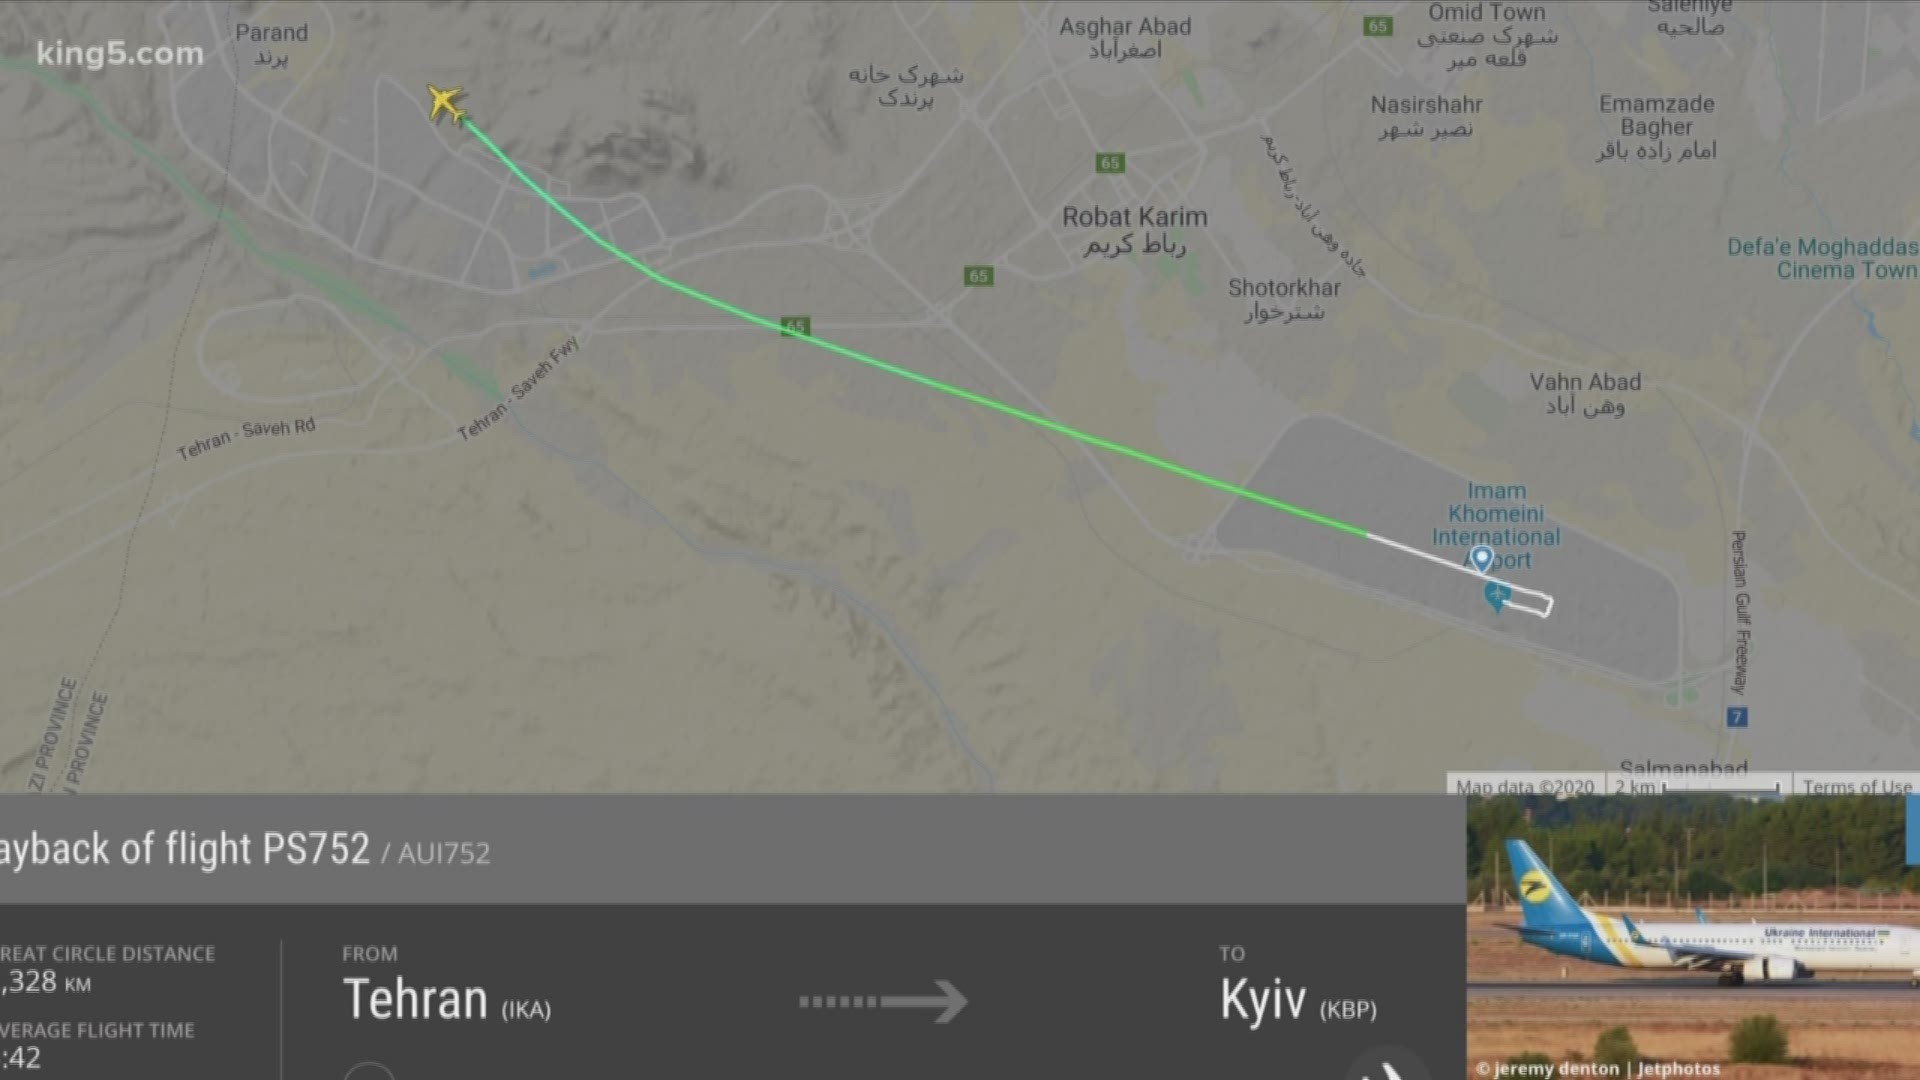 A passenger flight with 170 people on board crashed in Iran. There were no reported survivors.